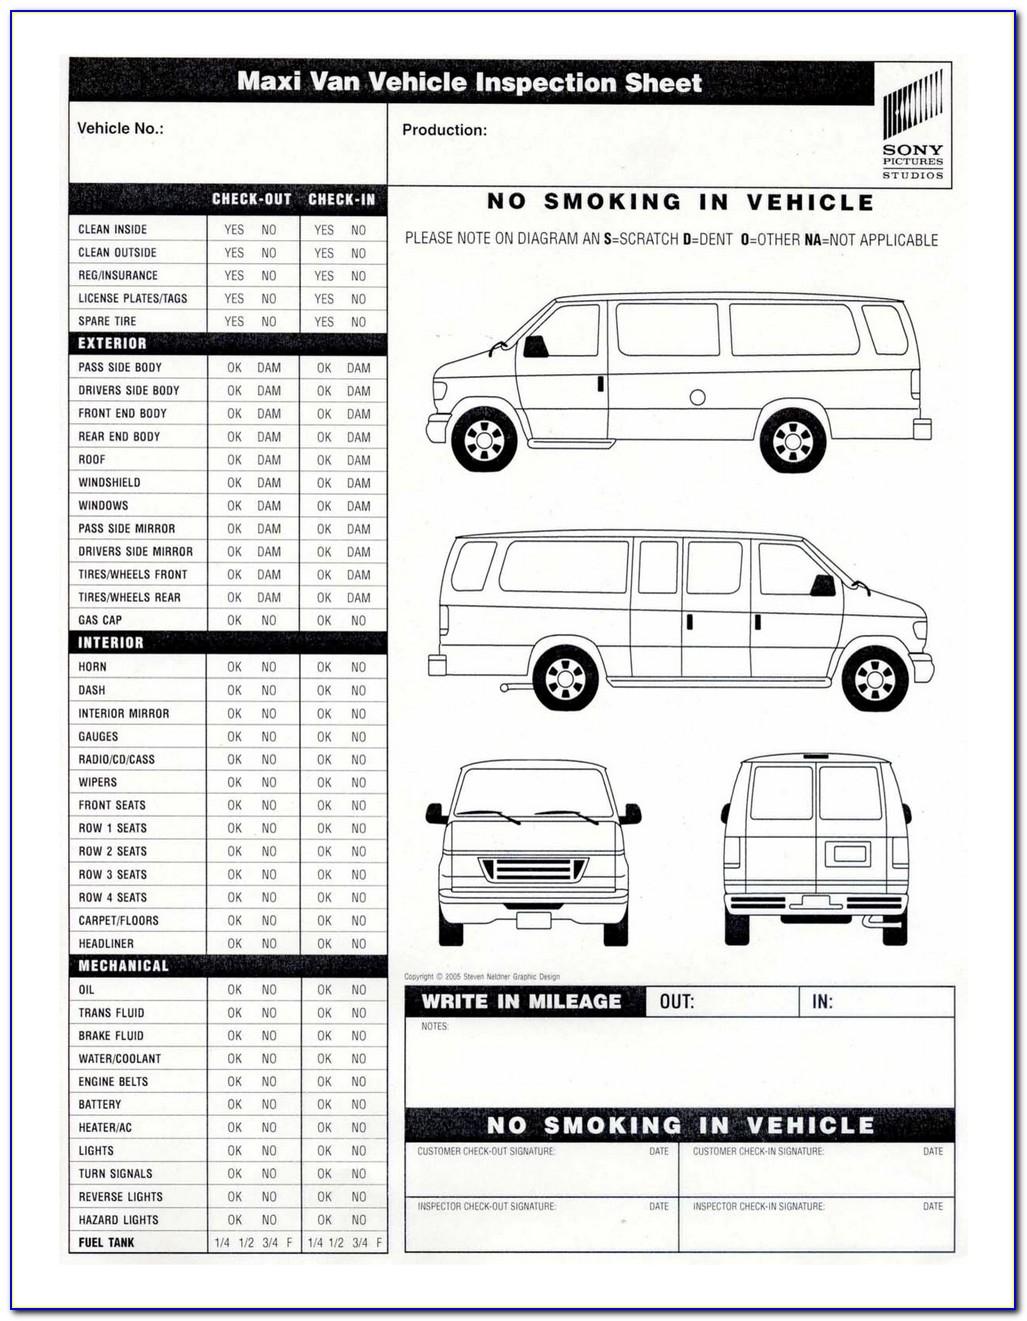 Vehicle Inspection Checklist Template Excel